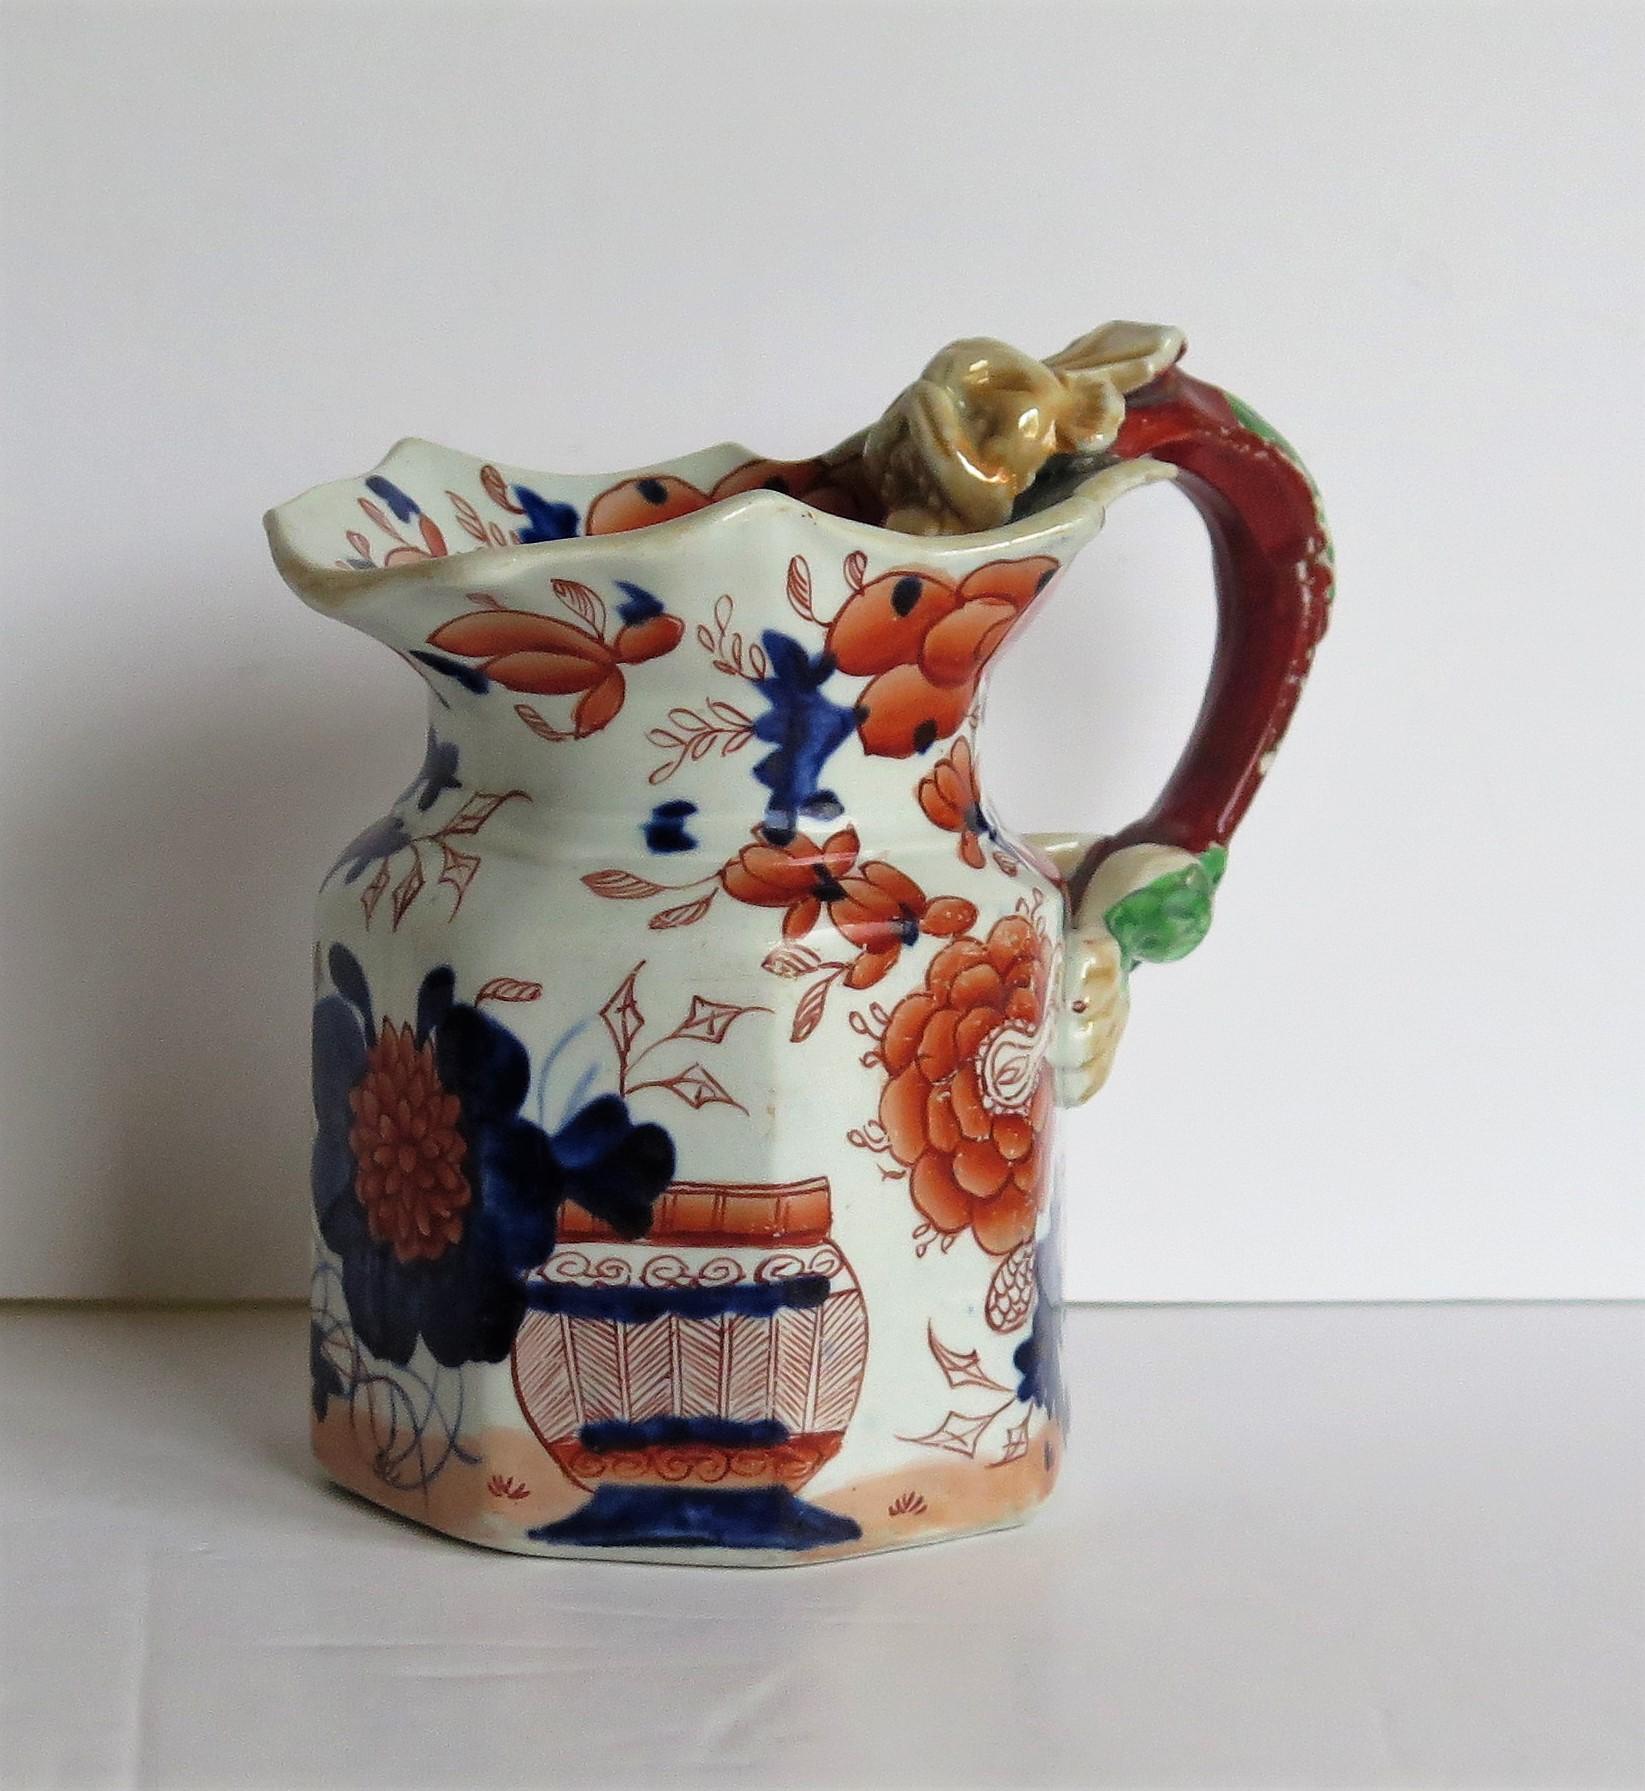 This is a very early, decorative Mason's Ironstone Jug or pitcher, made at their Lane Delph factory, Staffordshire Potteries, England, in the early 19th century, George 111rd period, circa 1815.

This jug has the 